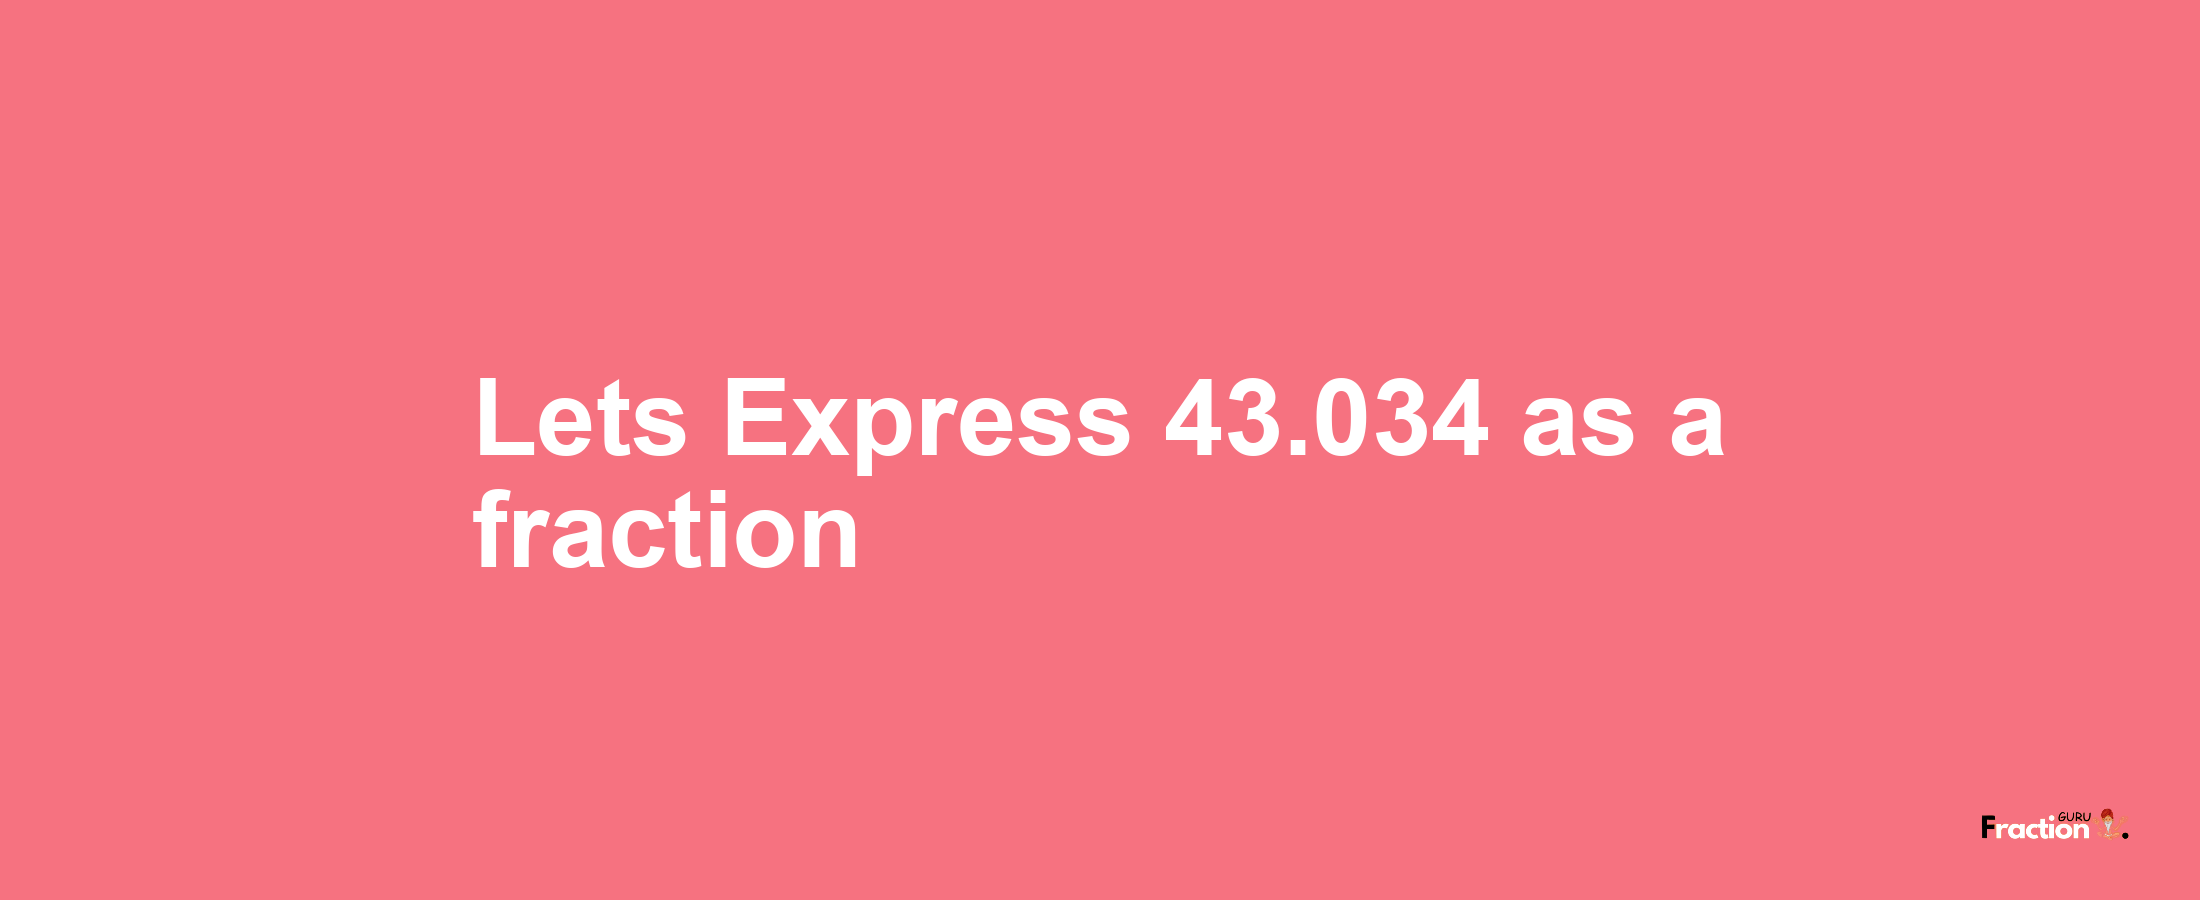 Lets Express 43.034 as afraction